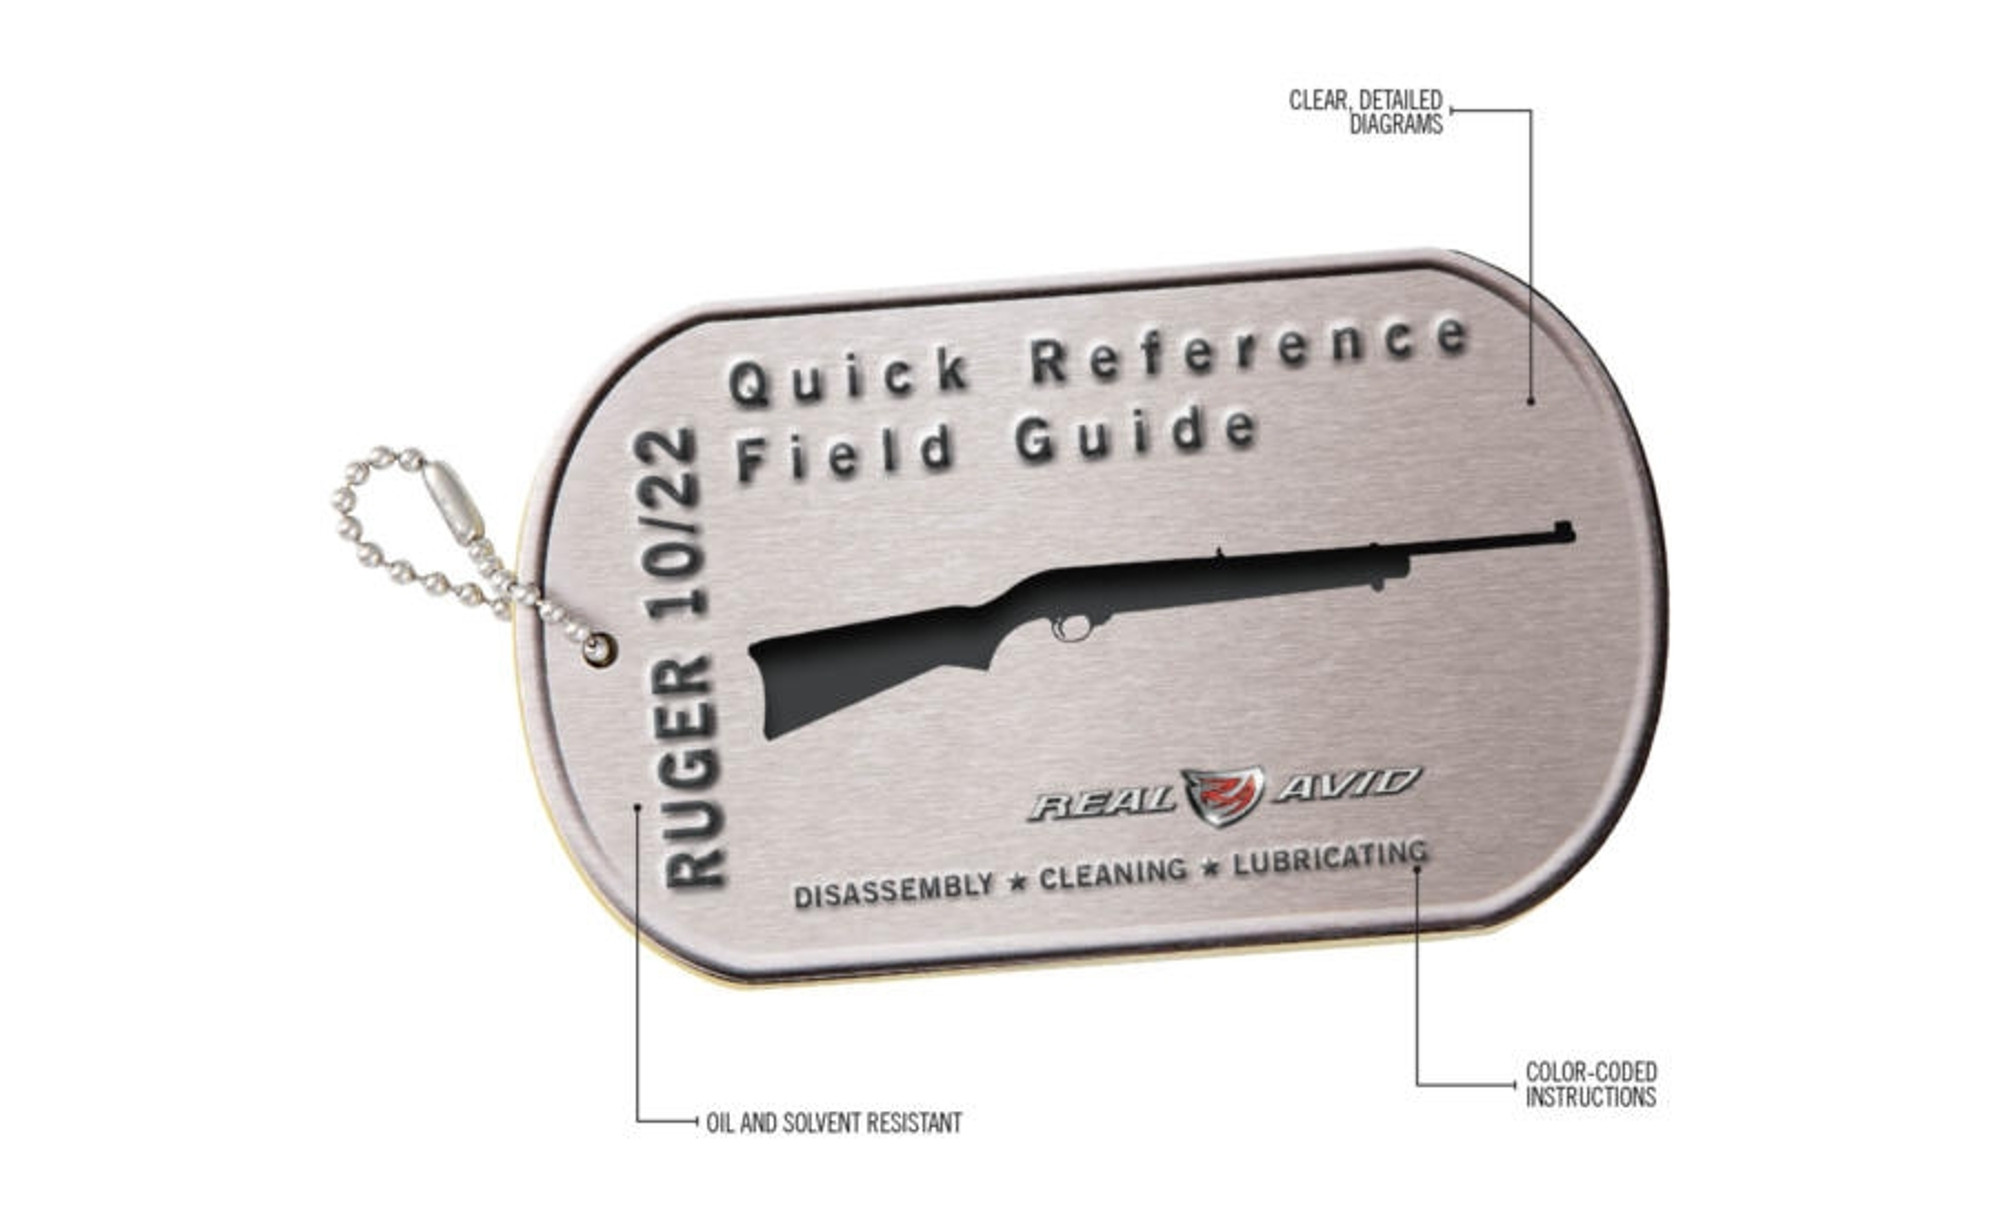 Ruger 10/22 Field Guide